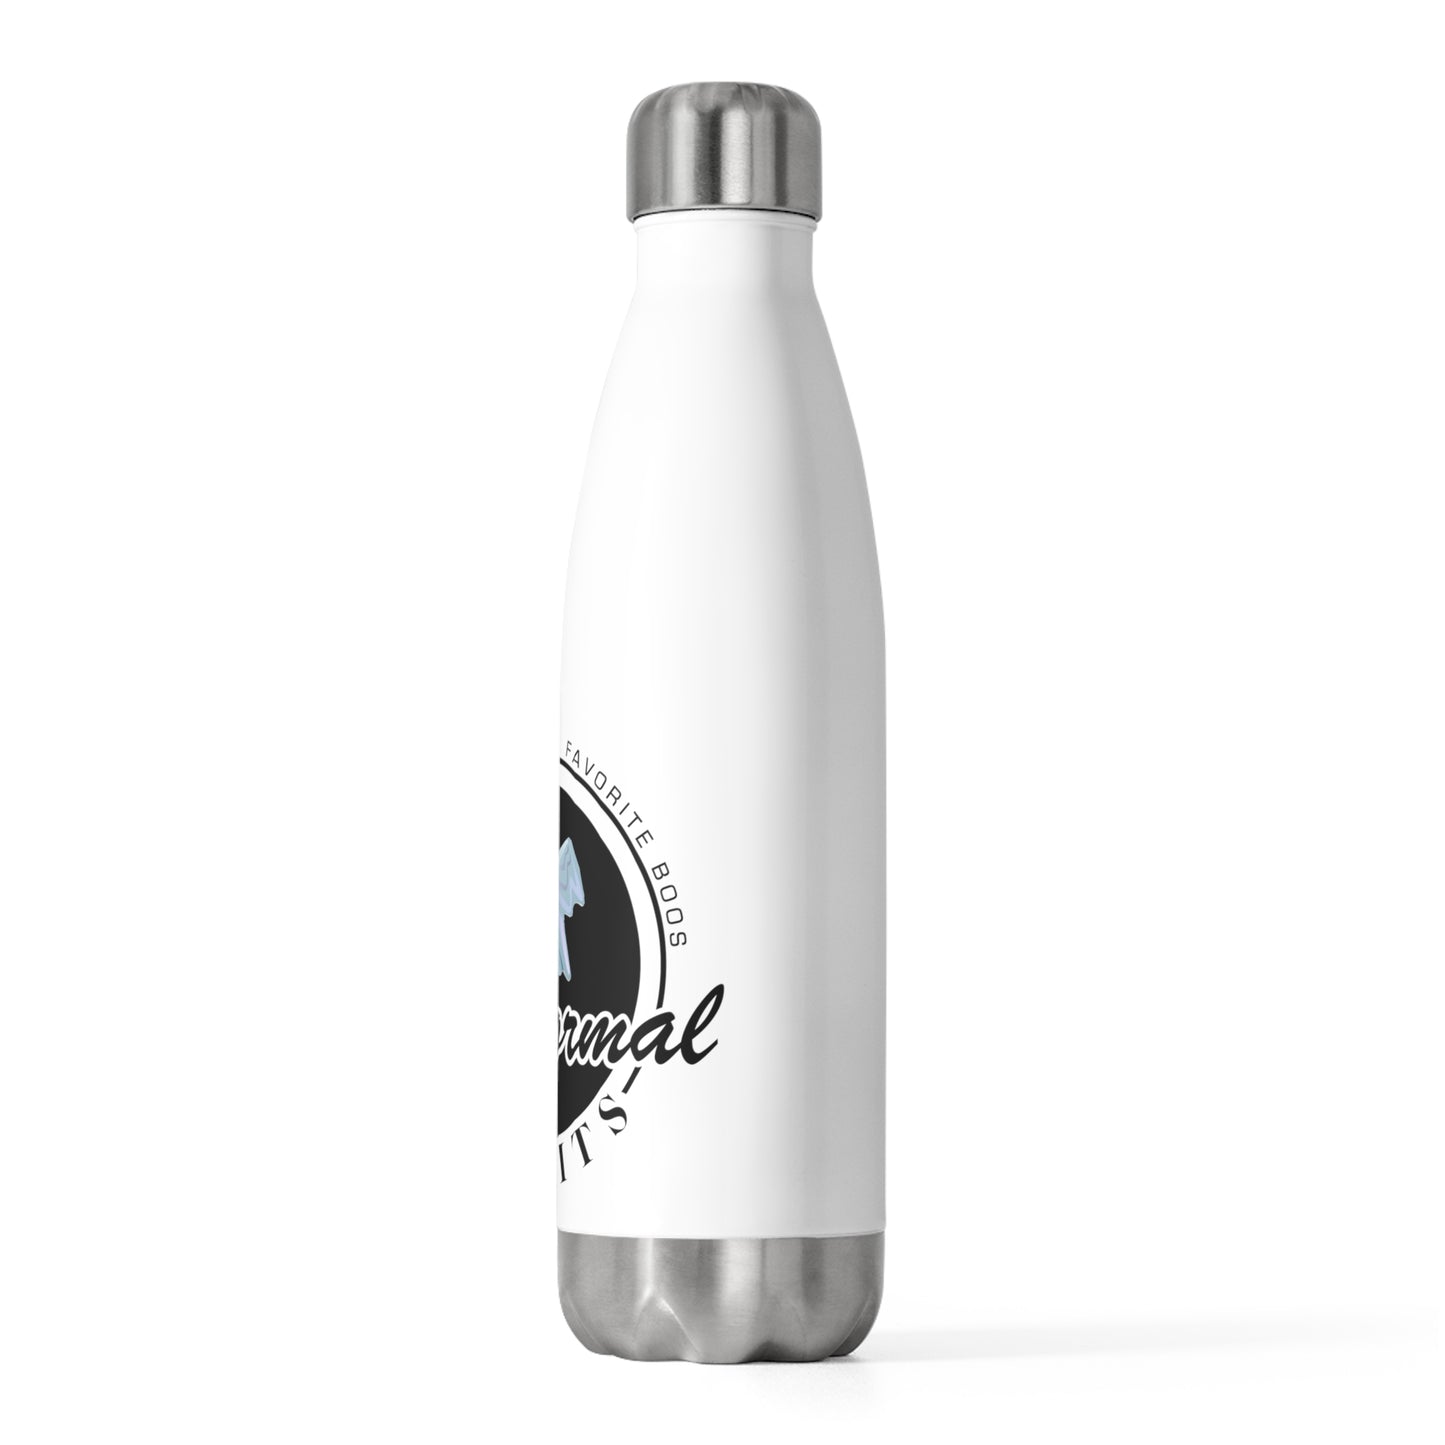 Boozie's 20oz Insulated Water ( Wink Wink ) Bottle